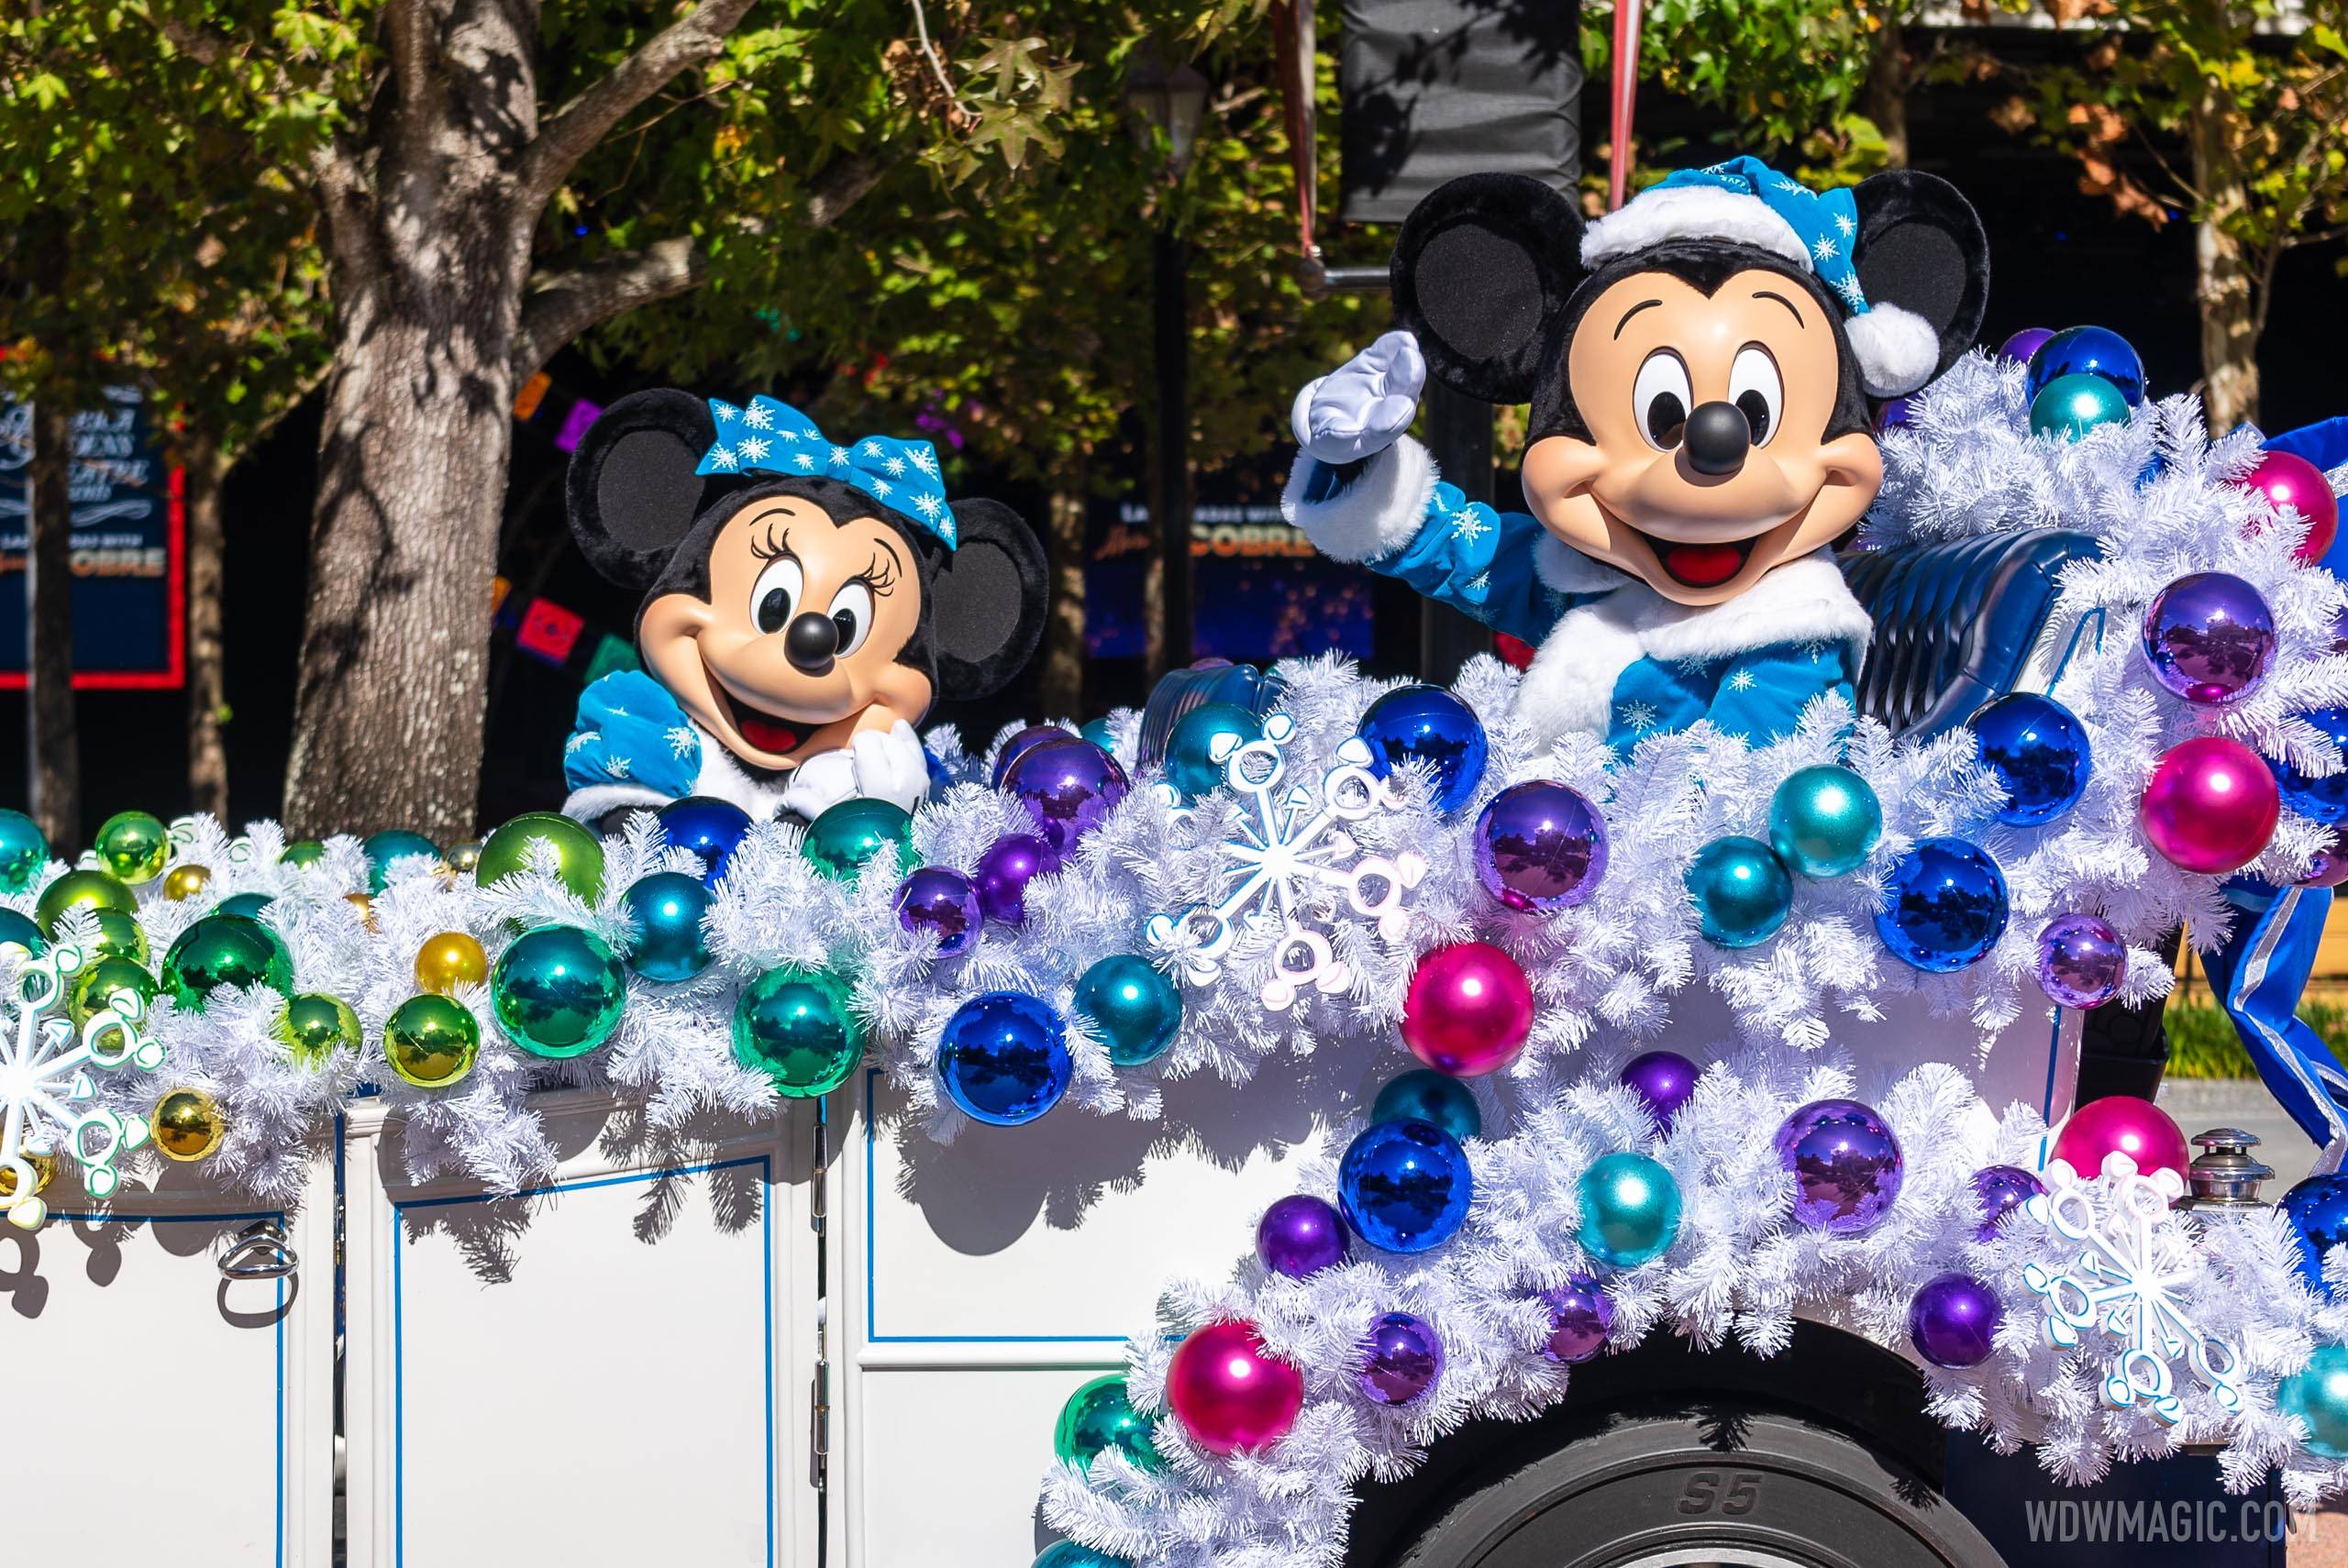 Mickey and friends will soon be venturing outside of the parks to visit guests at Disney hotels